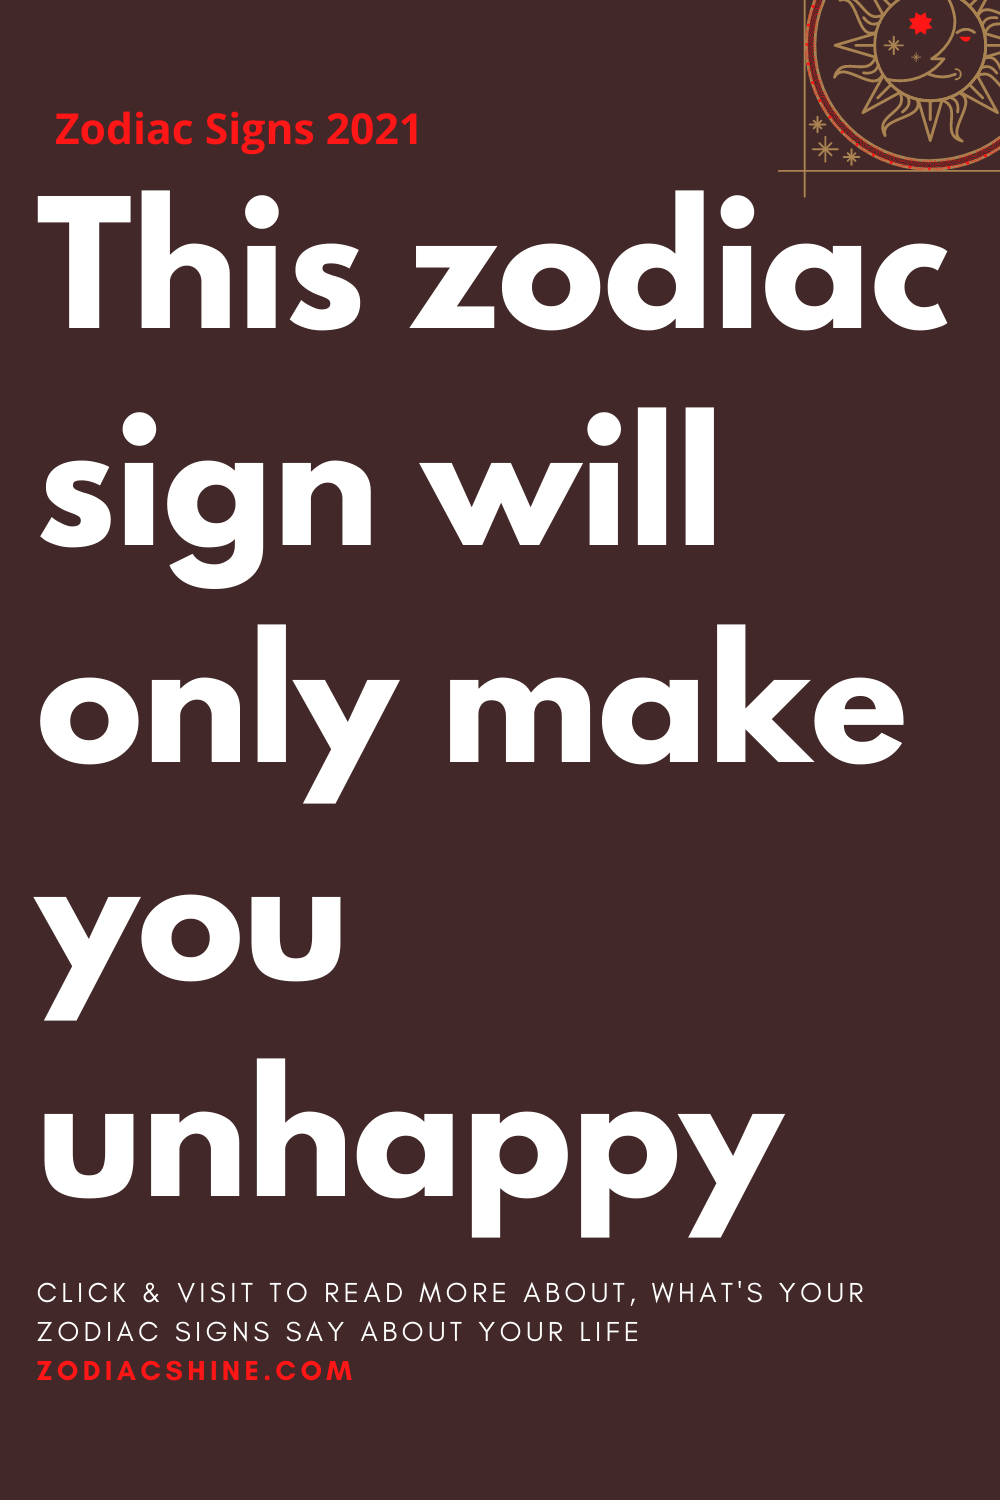 This zodiac sign will only make you unhappy